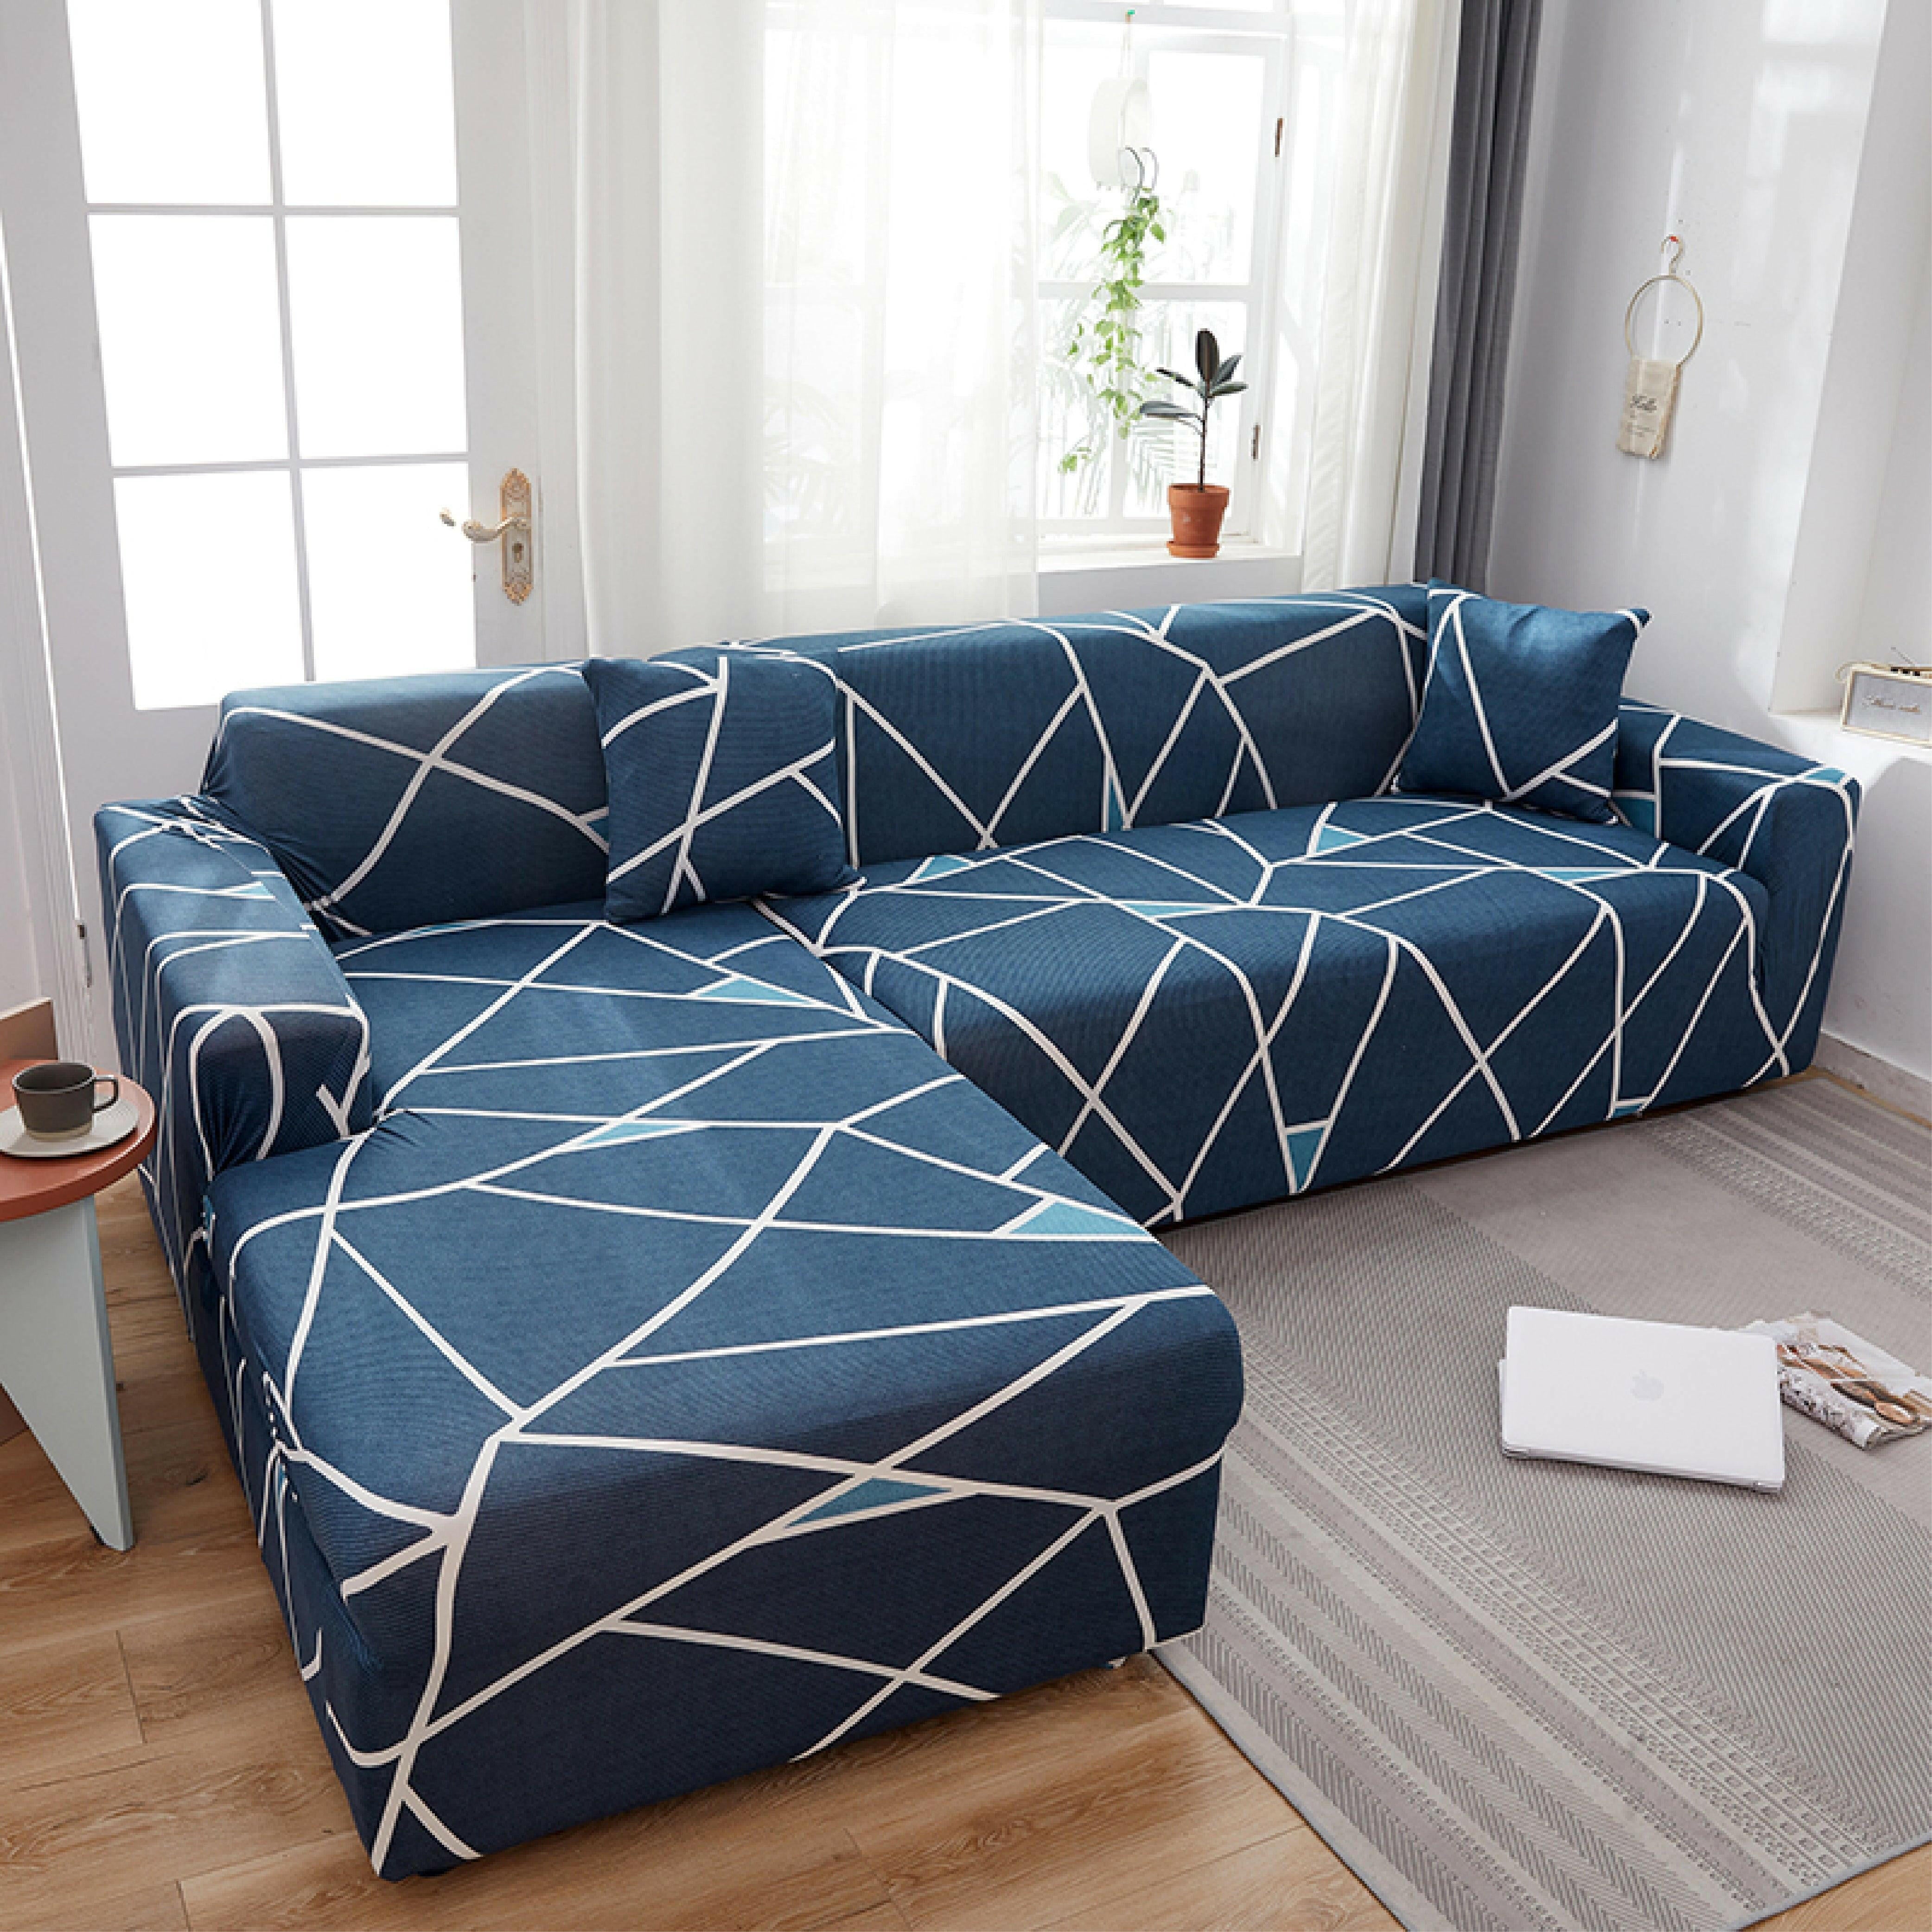 Hyper Cover Stretch Sofa Cover with Patterns Aibili | Sofa Covers | Brilliant Home Living